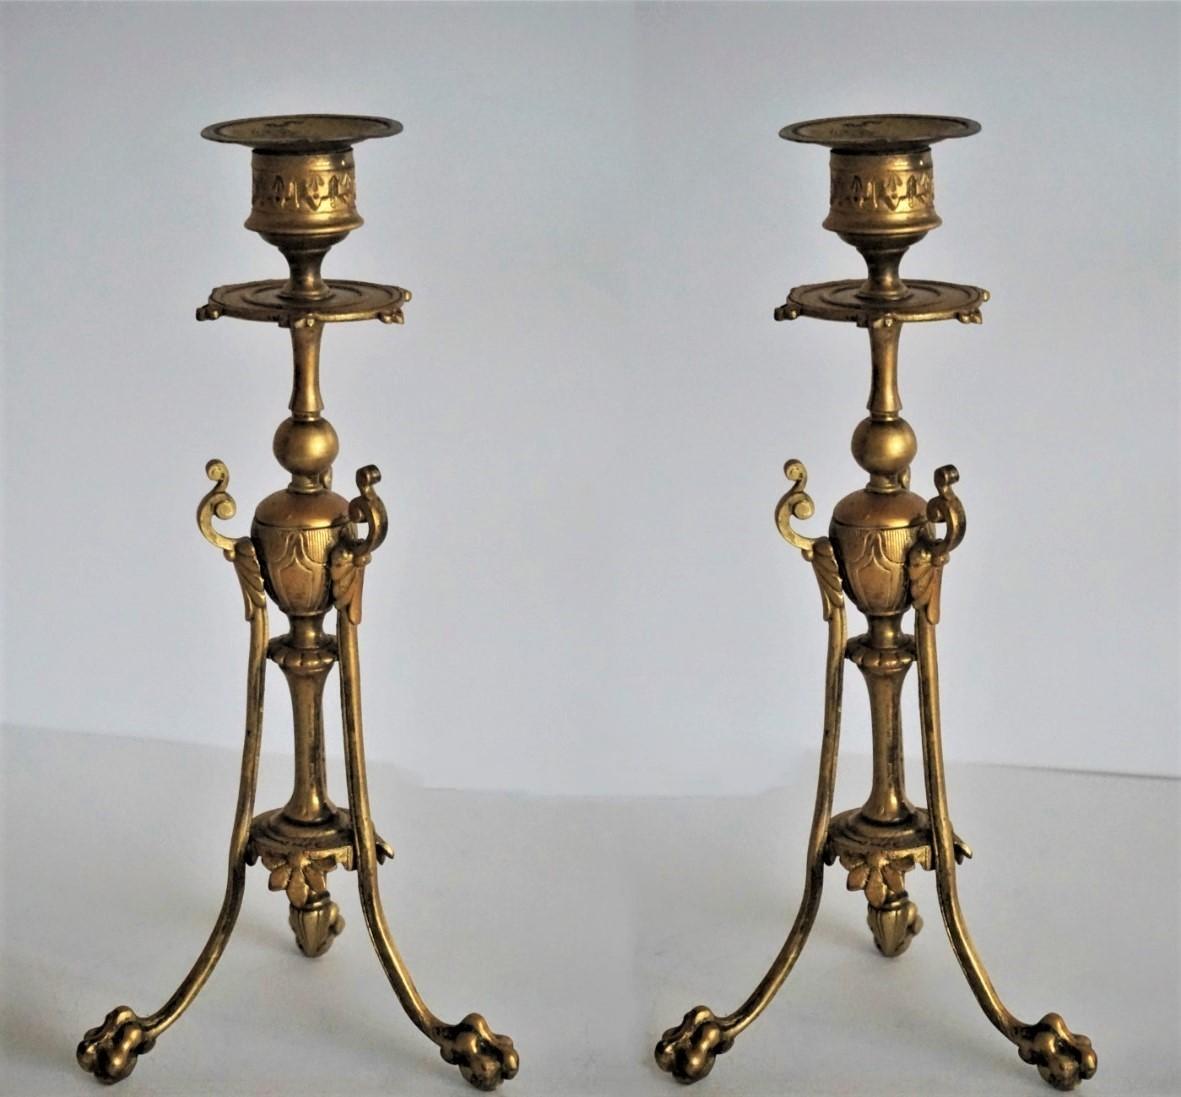 A pair of Empire style gilt bronze candlesticks raised on three lions paws, France, mid-19th century.
 